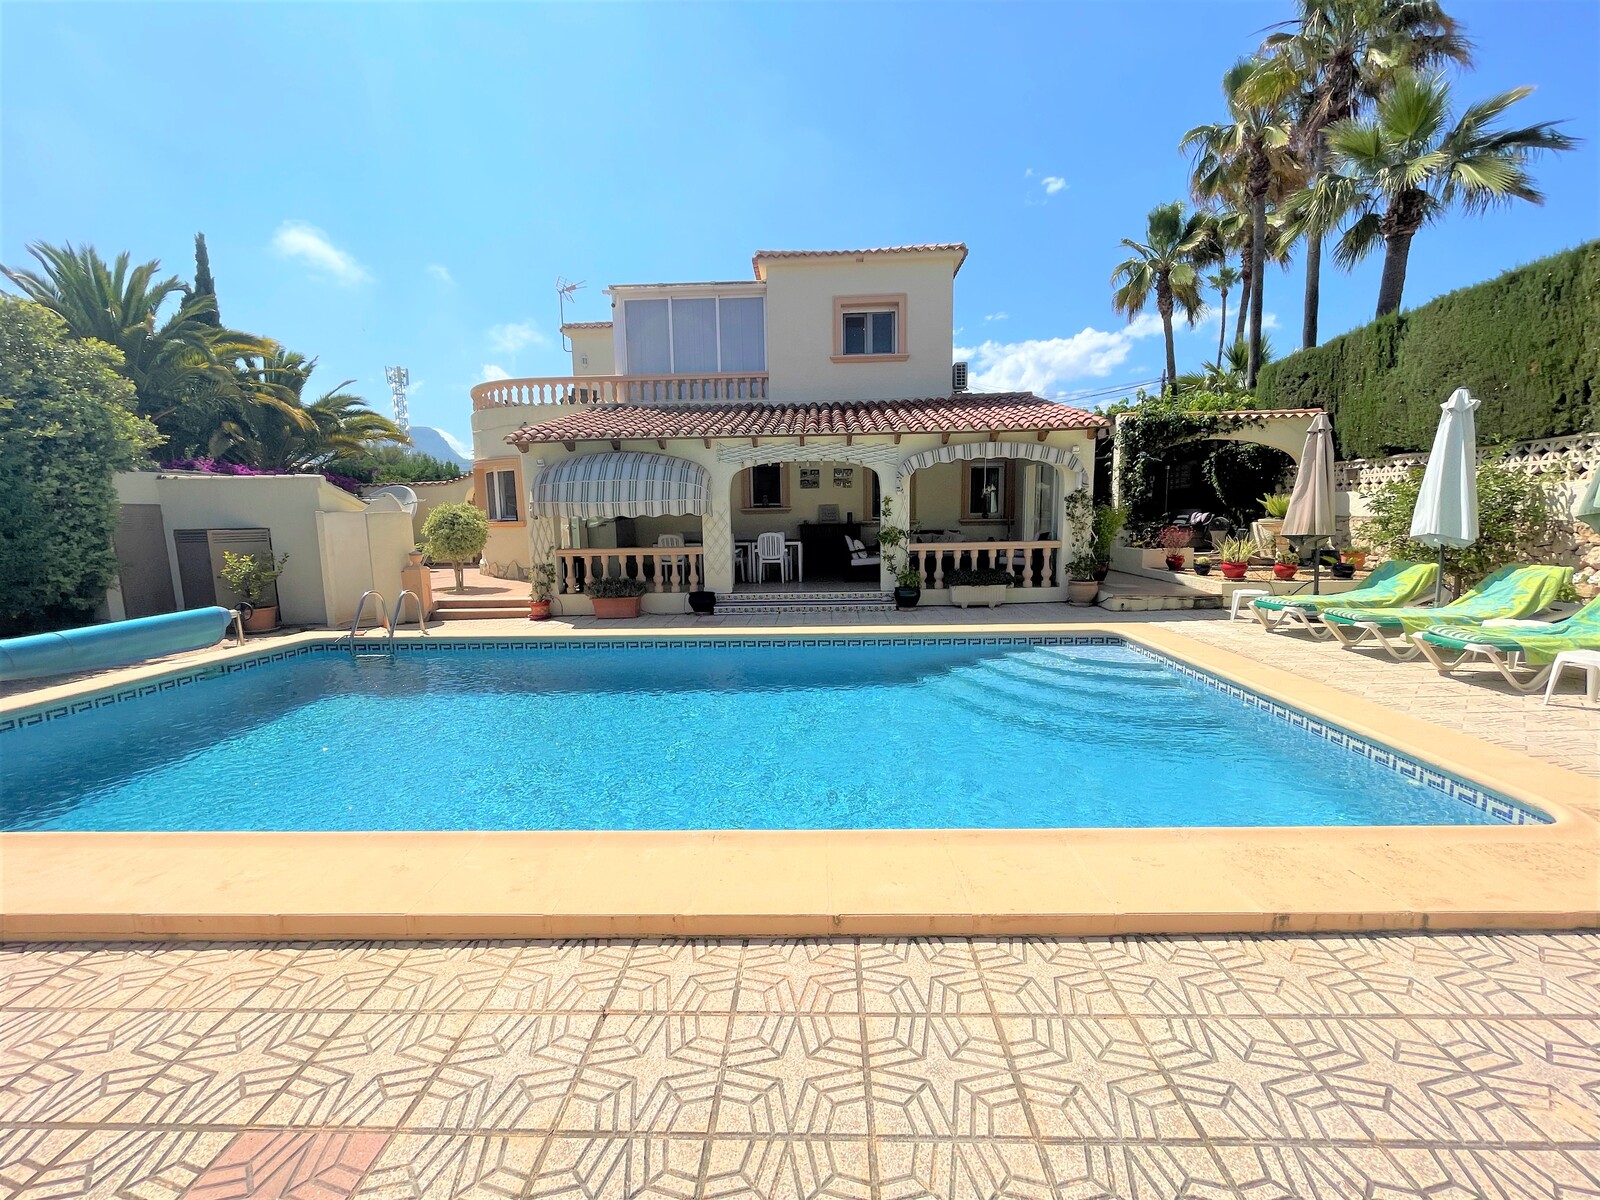 Stunning Detached Villa in Calpe, Within Walking Distance to Amenities.